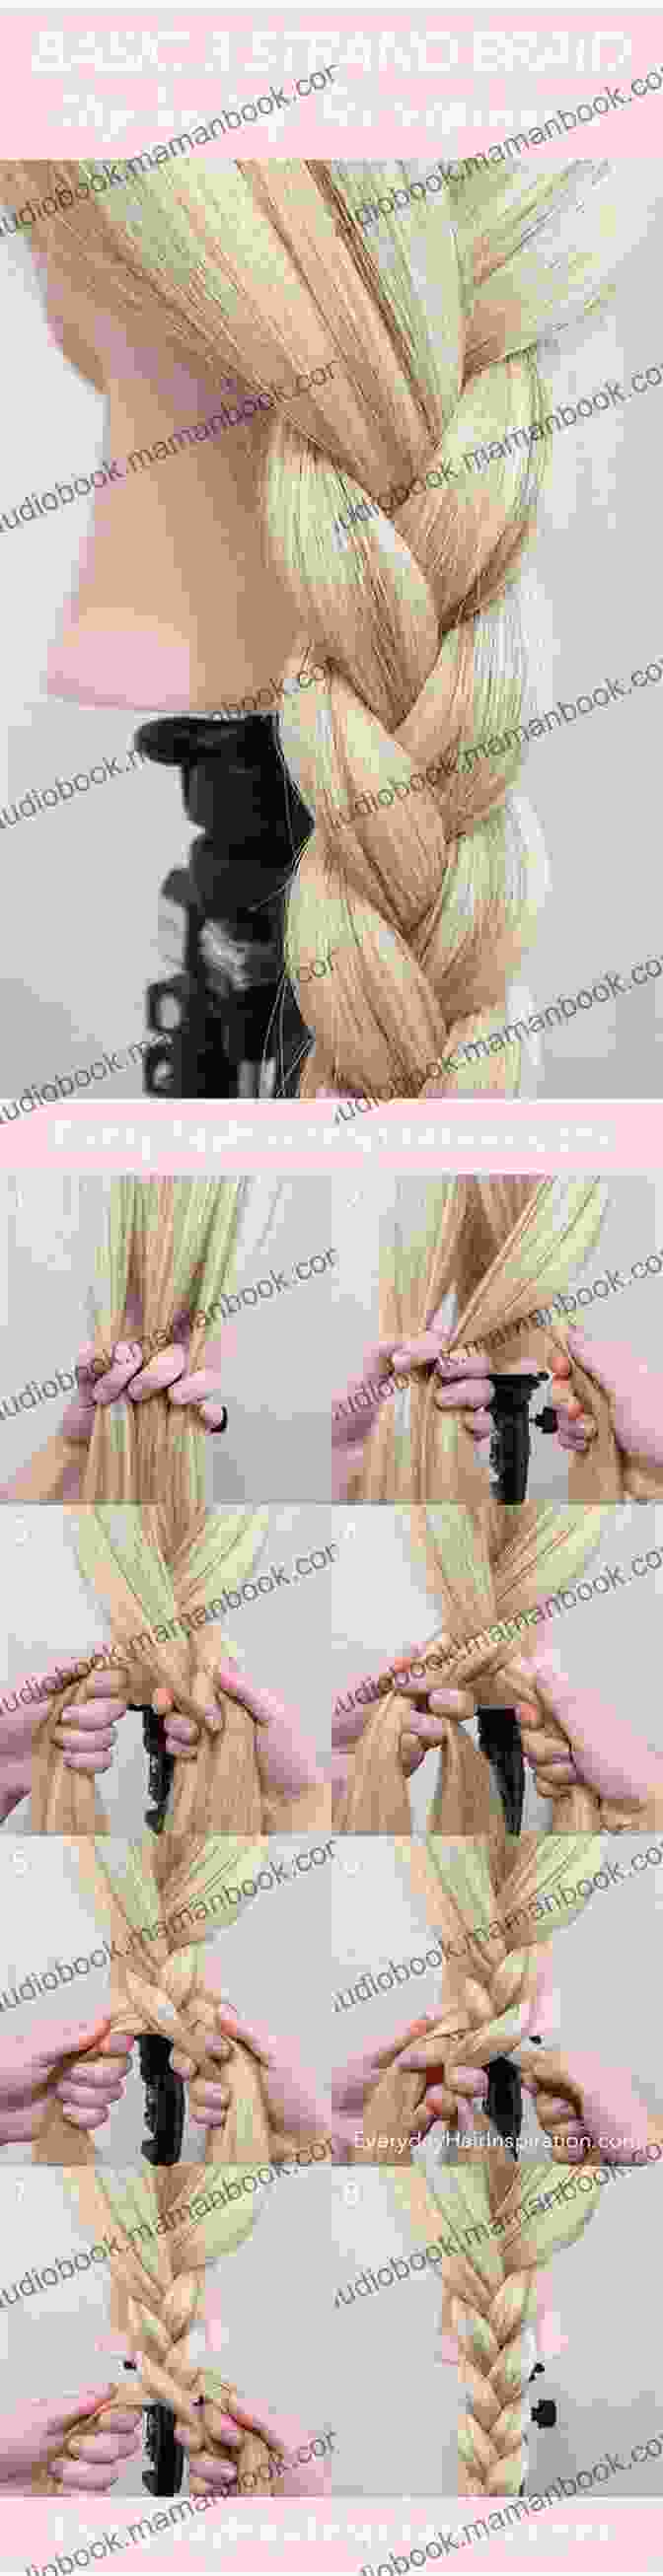 Step By Step Instructions For Creating A Three Strand Braid Show How Guides: Hair Braiding: The 9 Essential Braids Everyone Should Know